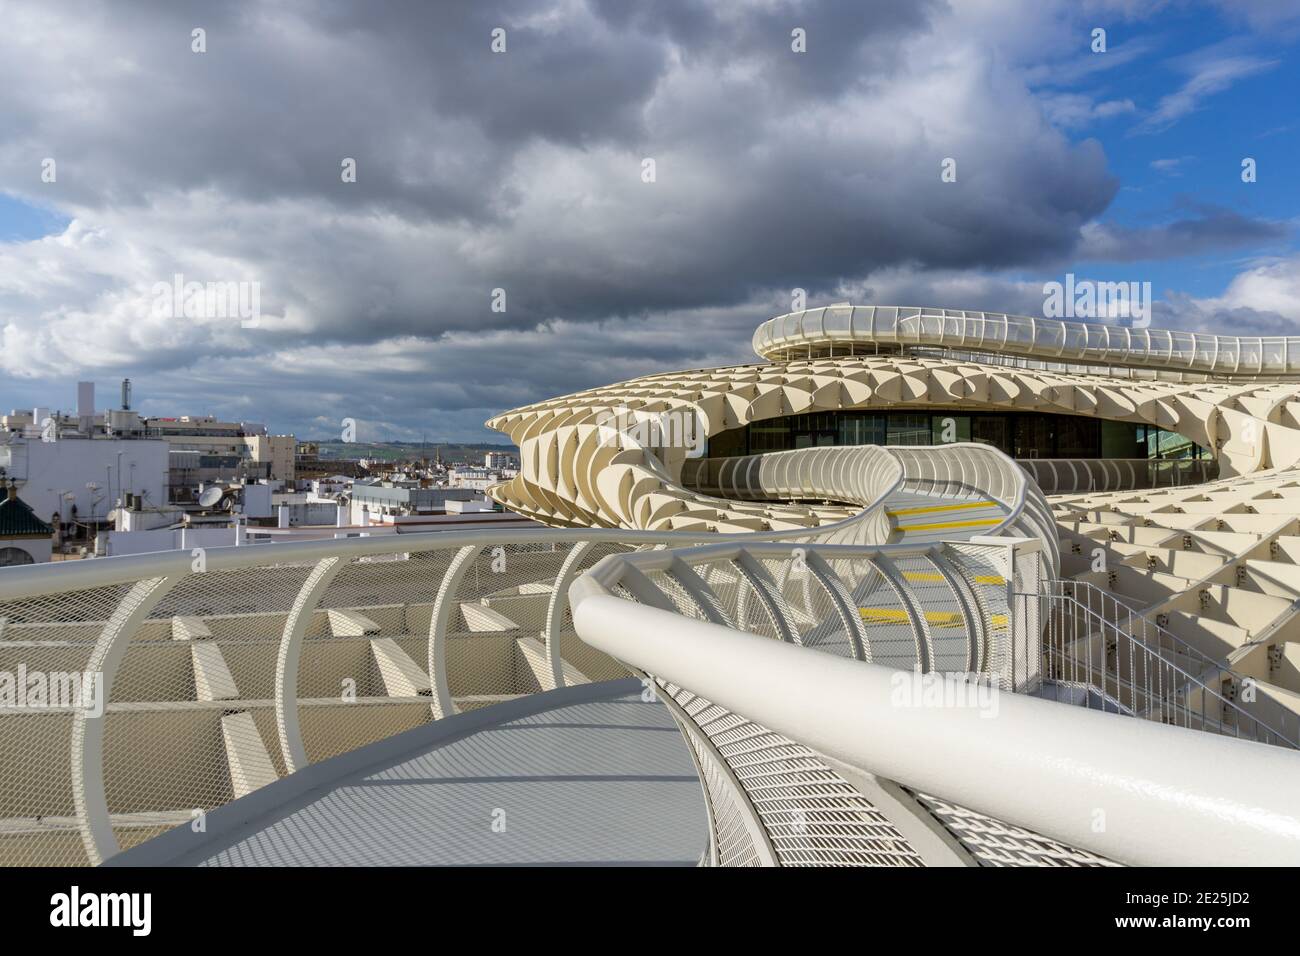 Seville, Spain - 10 January, 2021: top of the Metropol Parasol landmark structure and view of the city of Seville Stock Photo